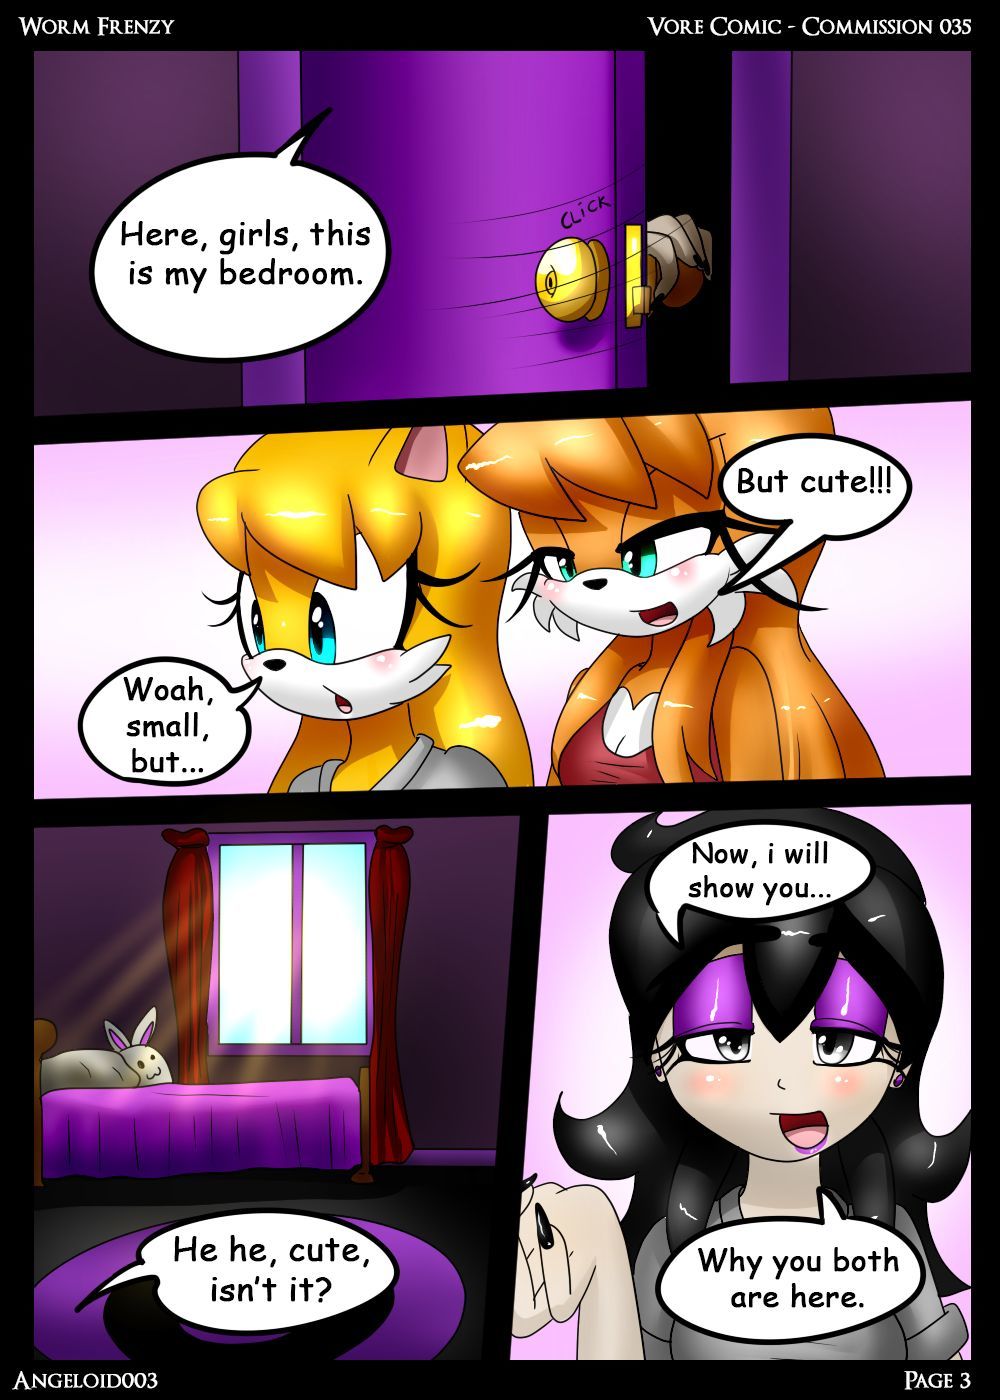 Worm Frenzy - Angeloid003 page 3